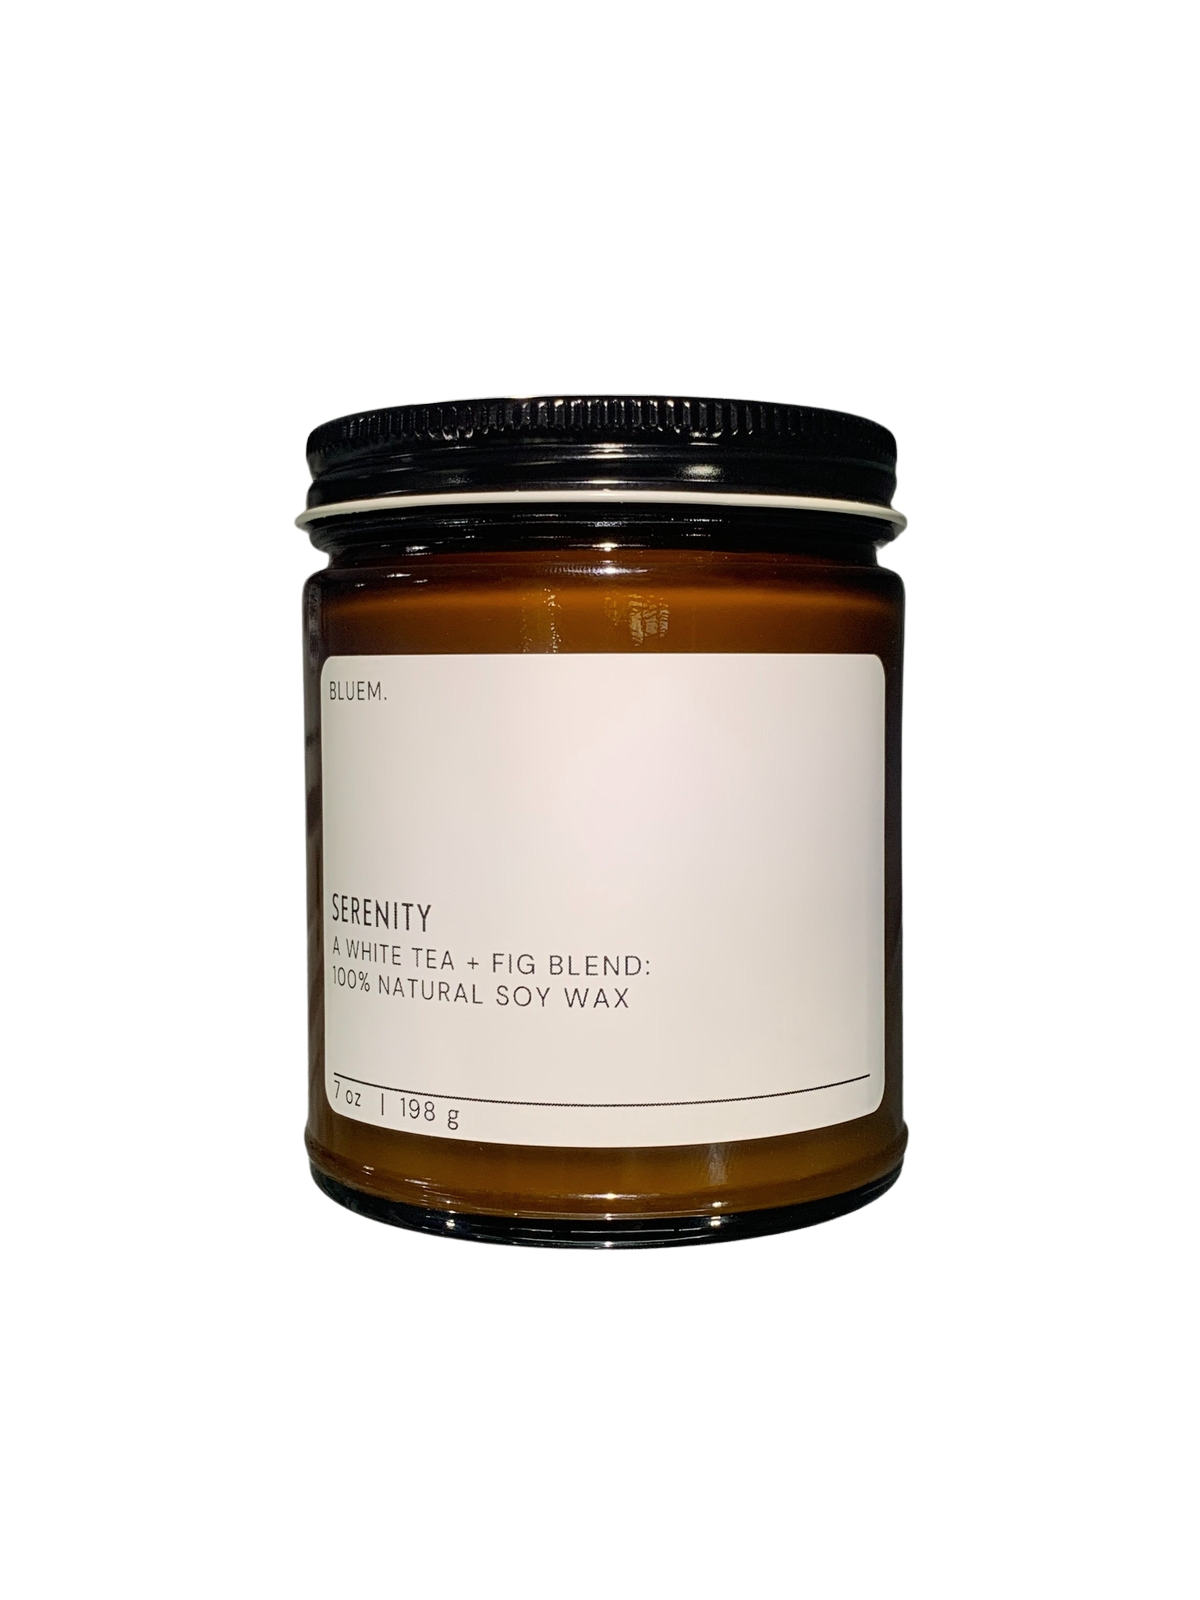 Serenity Candle - Bluem. Coffee